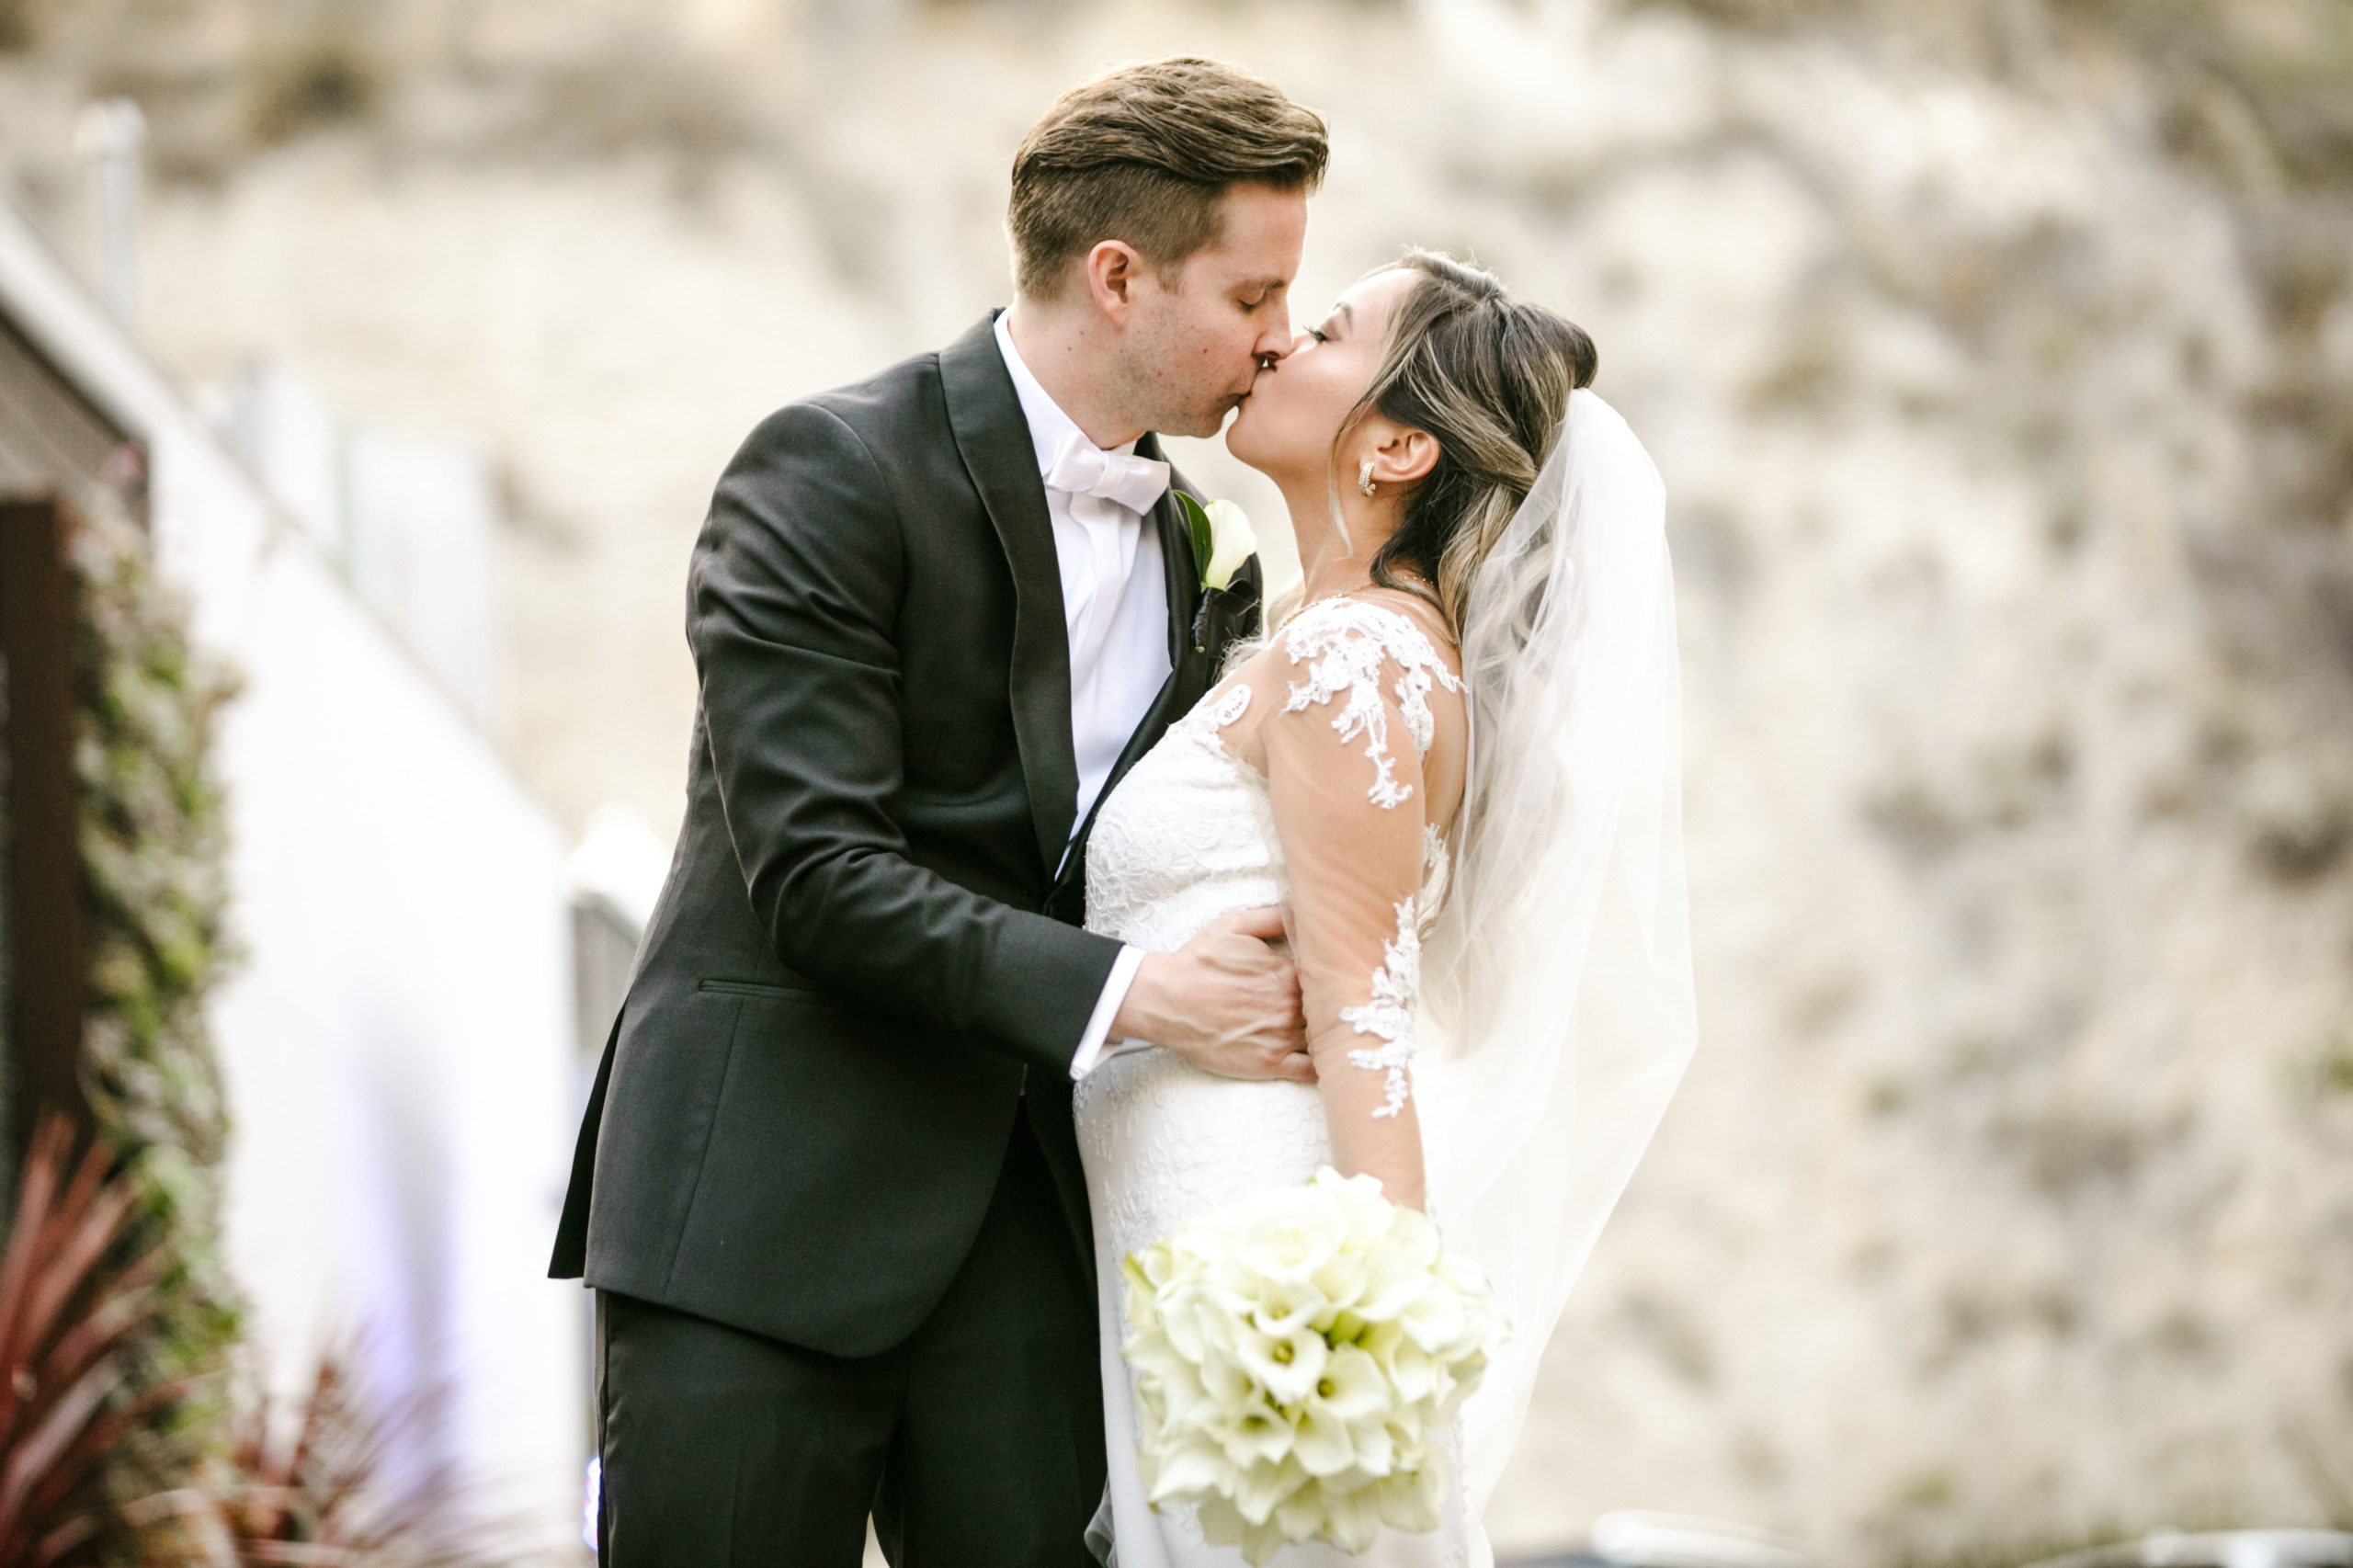 The Top 8 Beach Wedding Venues In Orange County, CA. Newlywed couple sharing a kiss during their wedding shoot in the Ritz-Carlton.